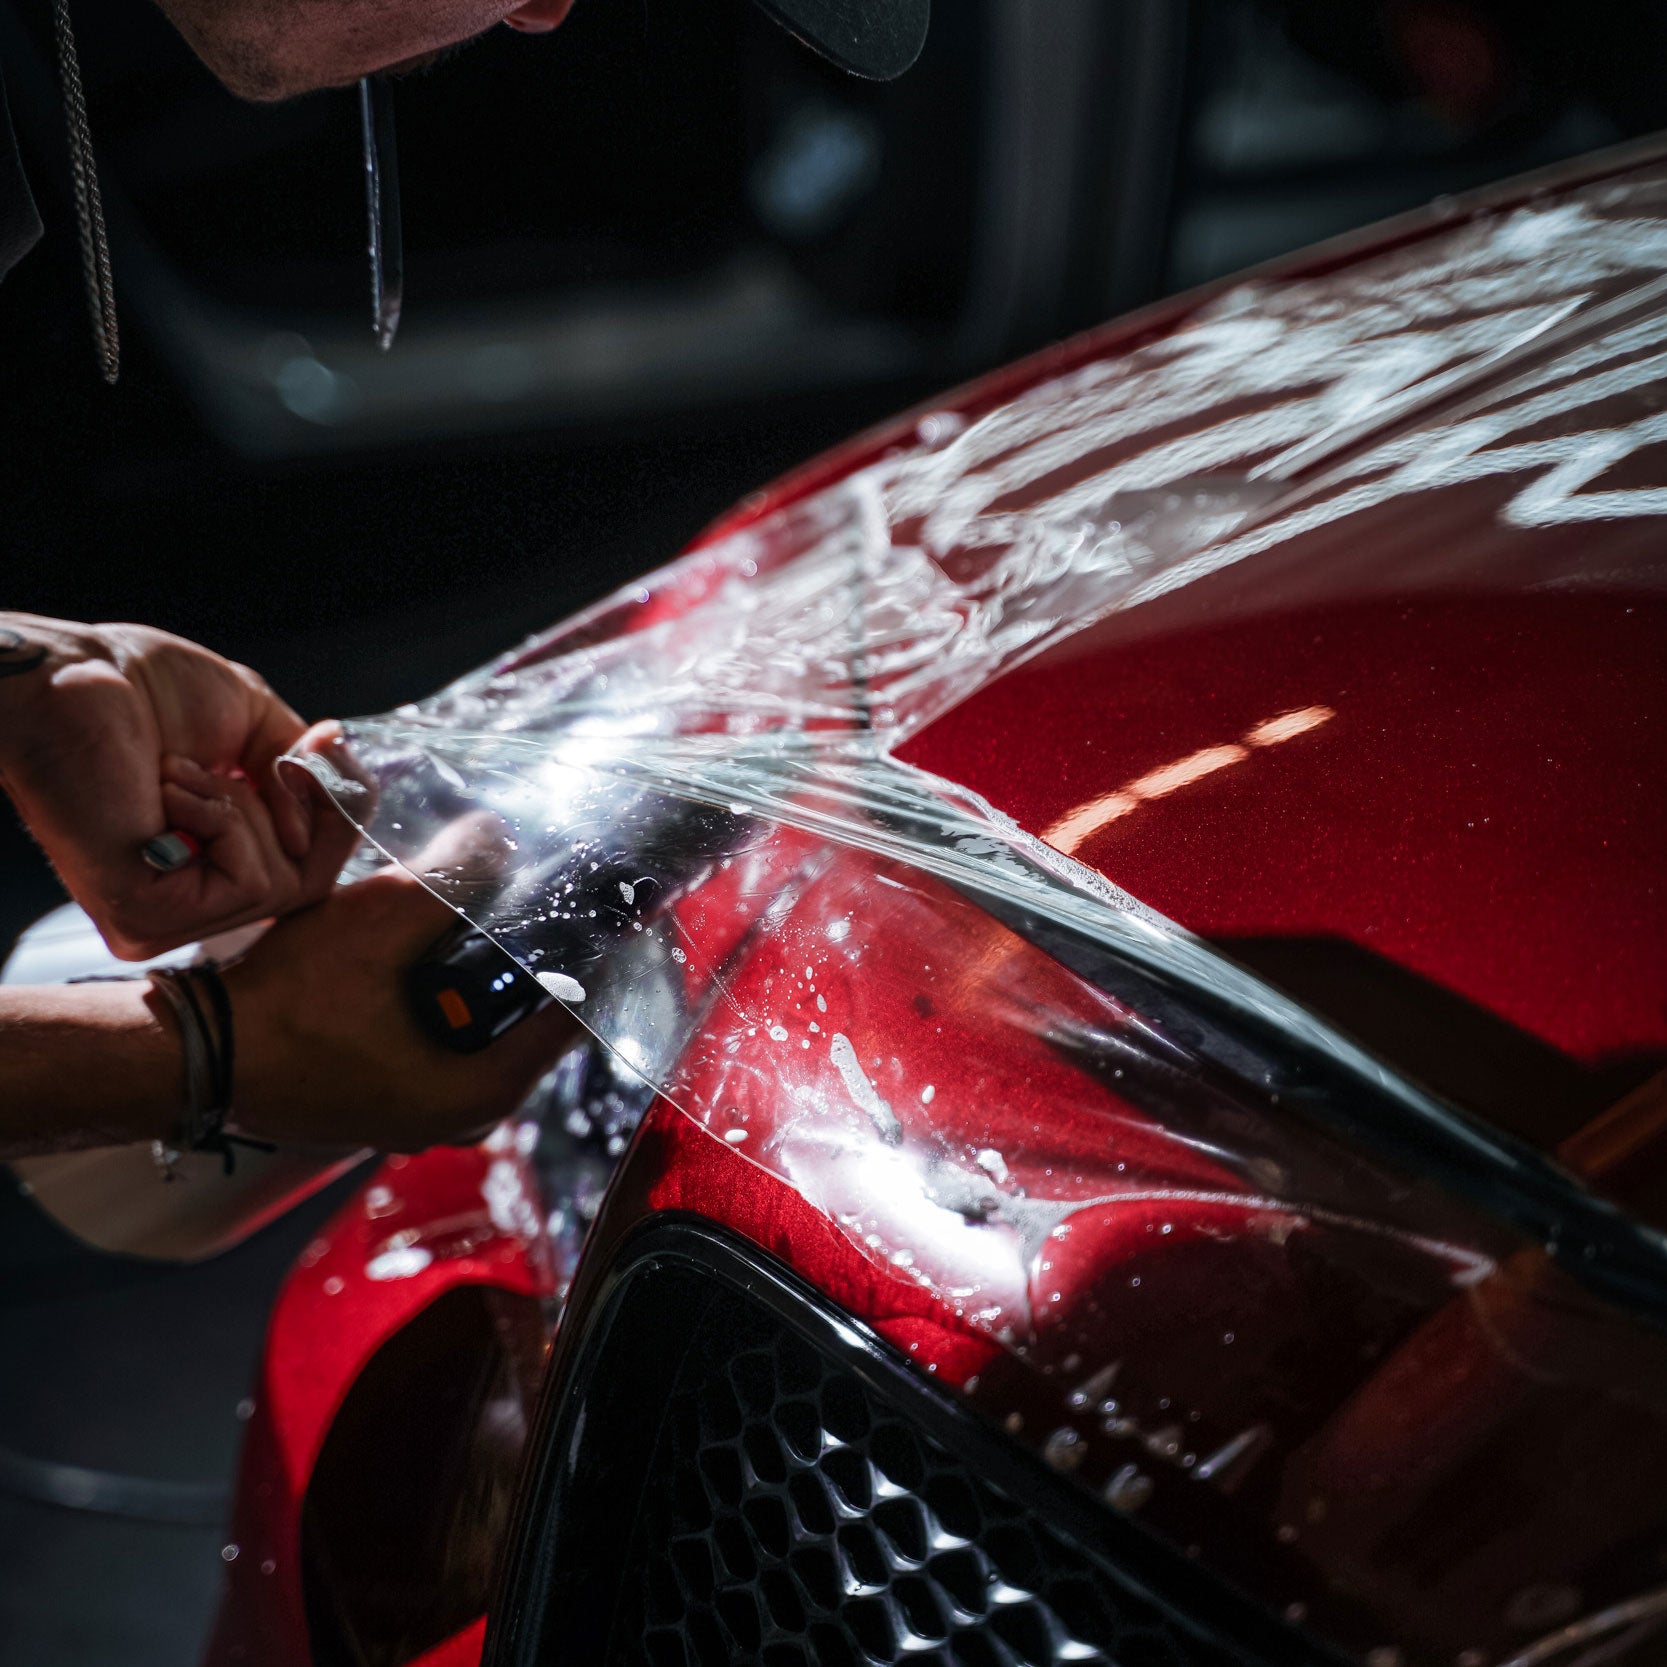 Installing glossy PPF on a red car